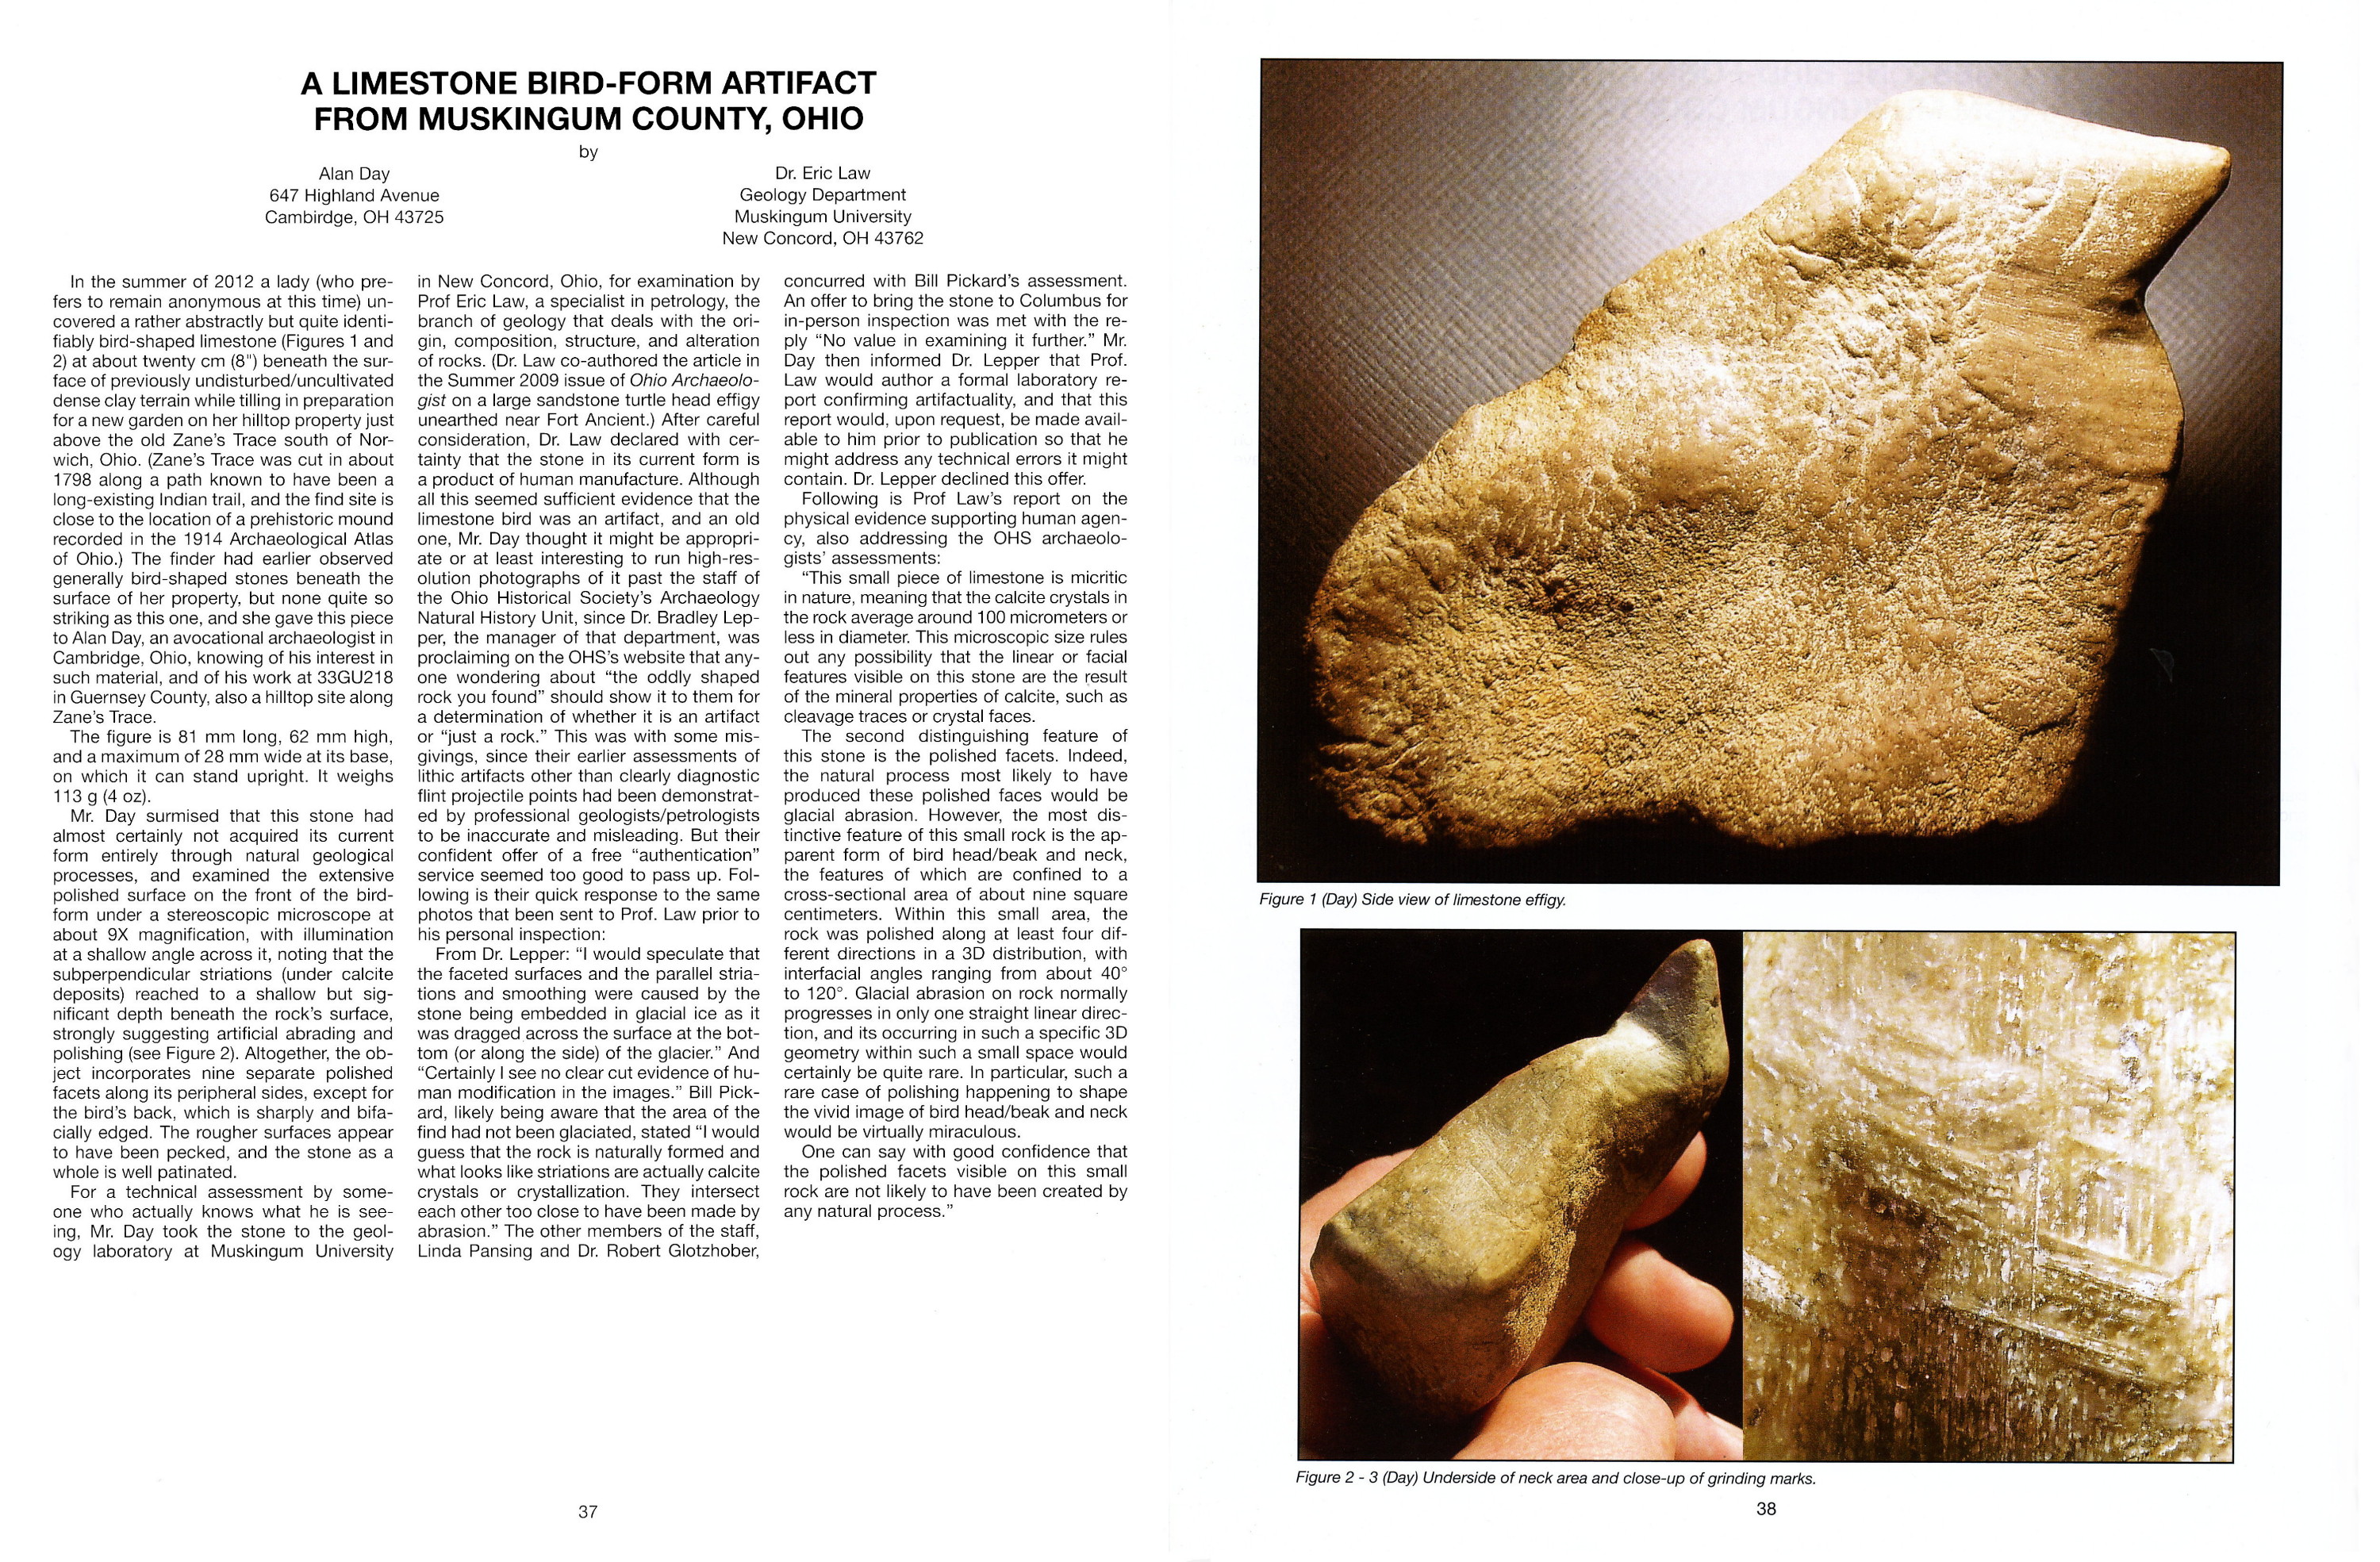 A Limestone Bird-form Artifact from Muskingum County - Ohio Archaeologist Article, Fall 2013